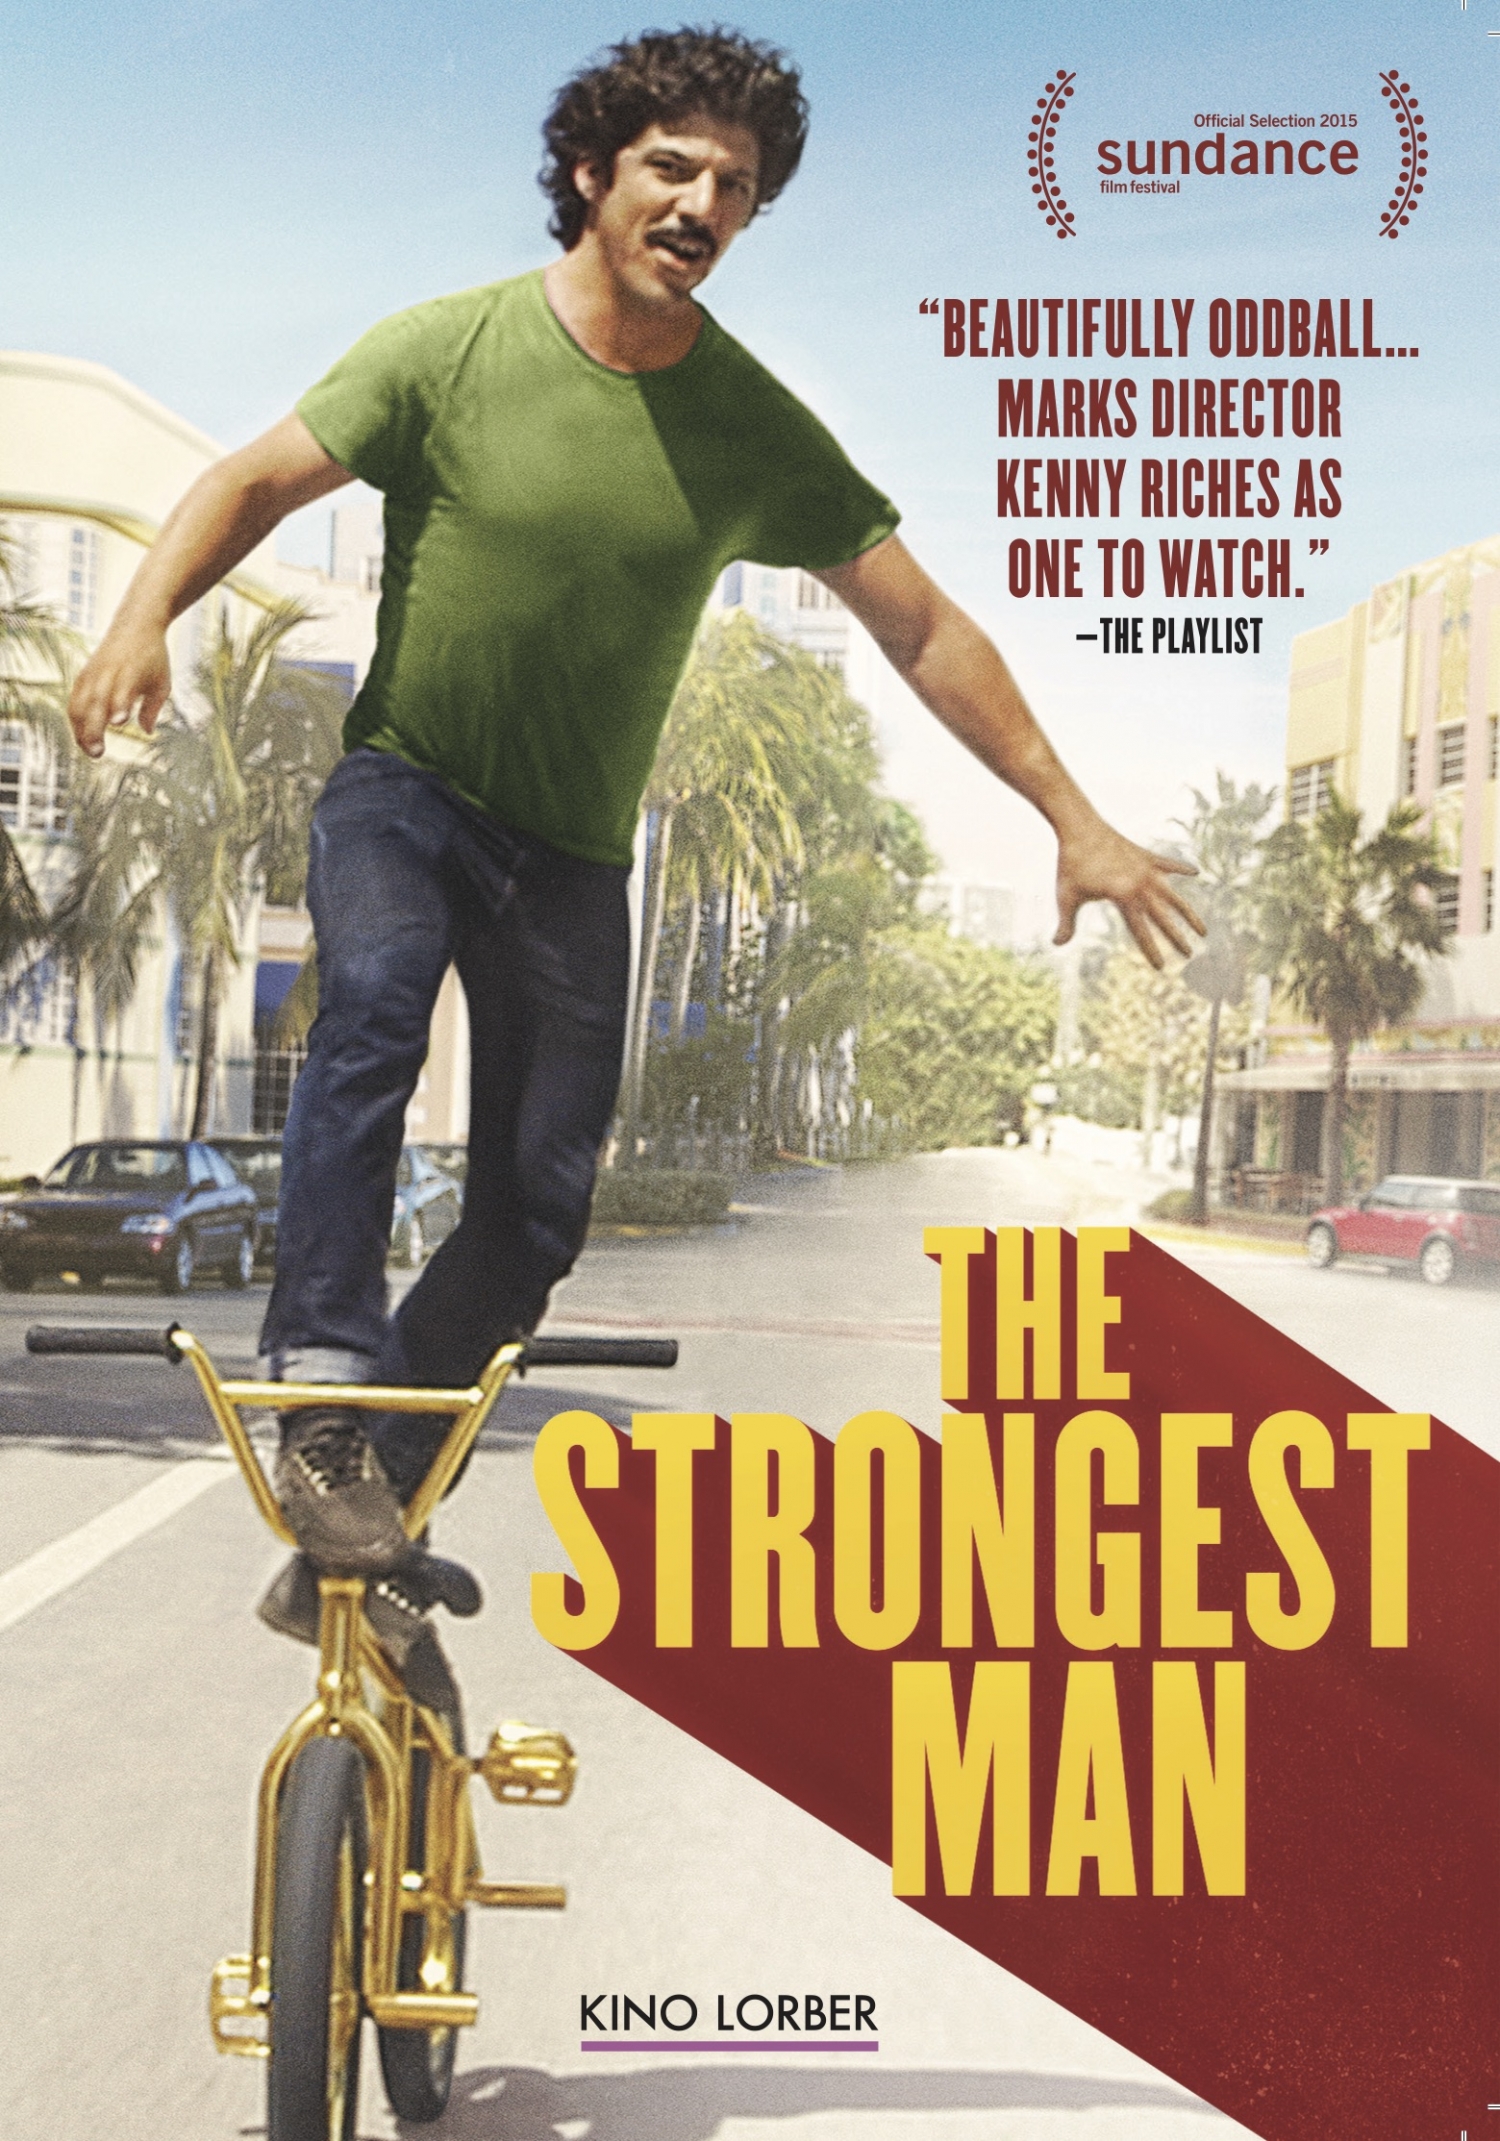 LOCUST LATE: Screening of The Strongest Man followed by Q & A with the Robert Lorie and Kenny Riches